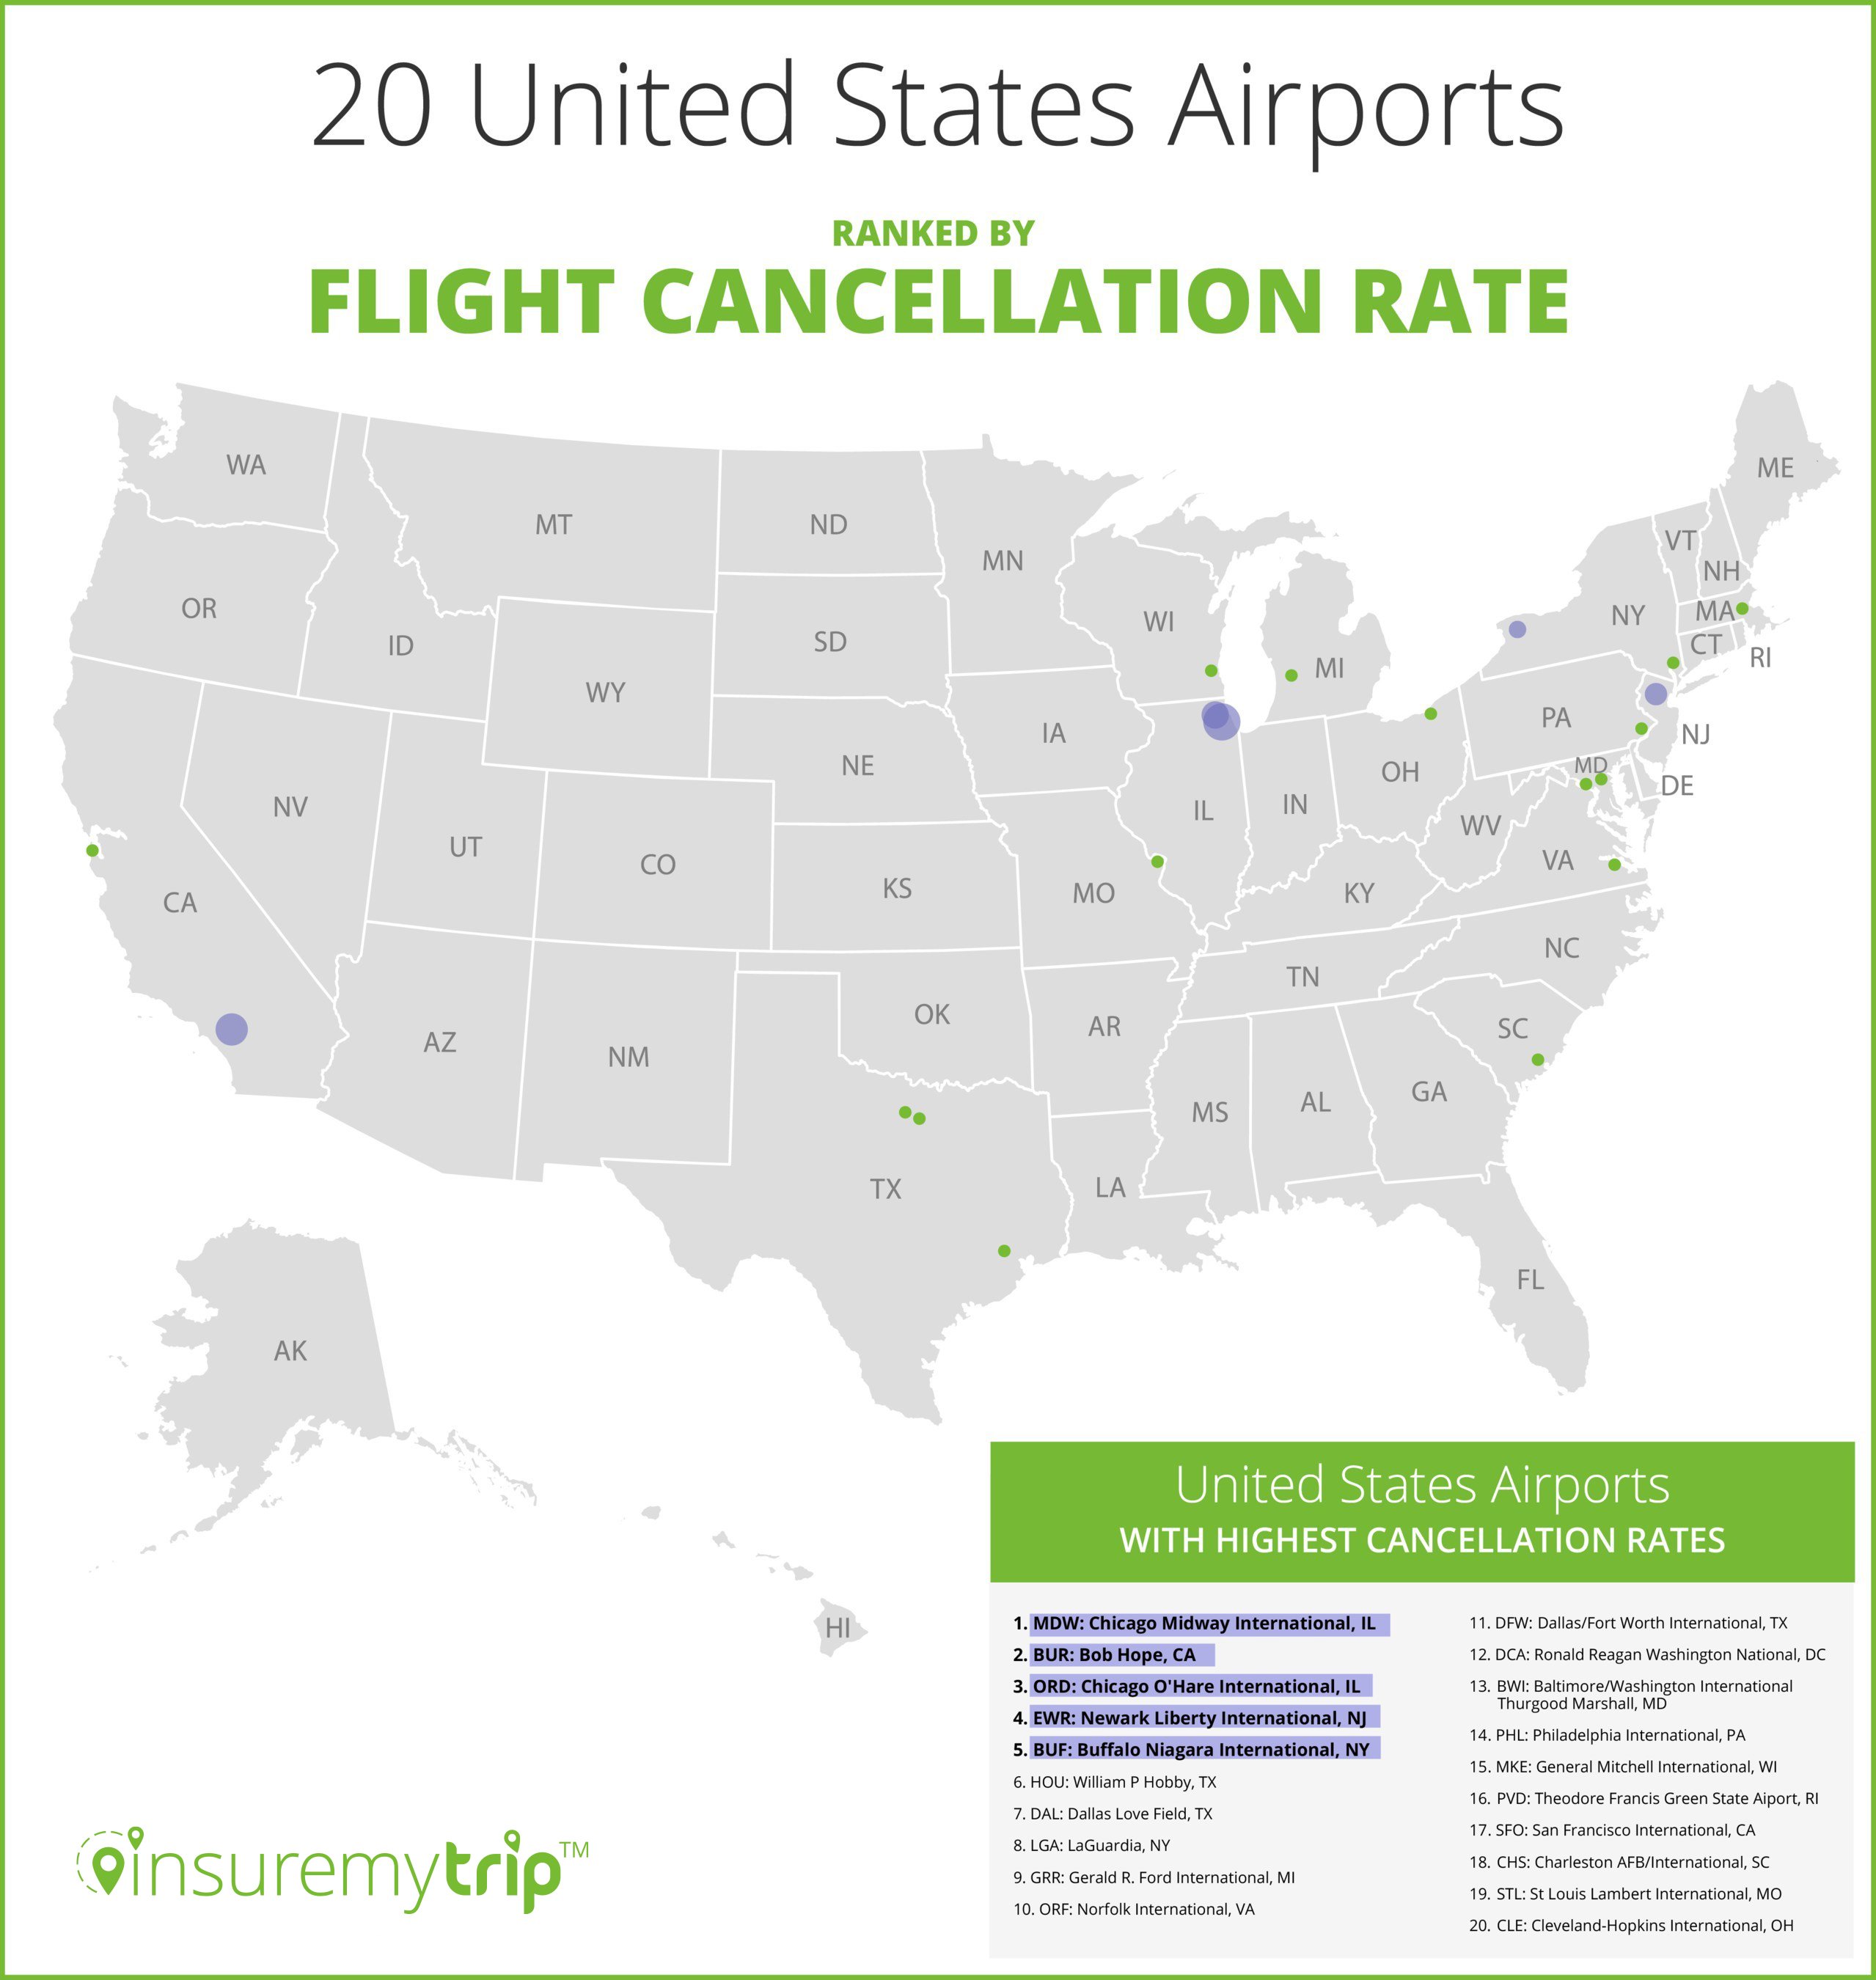 20 US Airports Ranked by Cancellation Rates for 2019